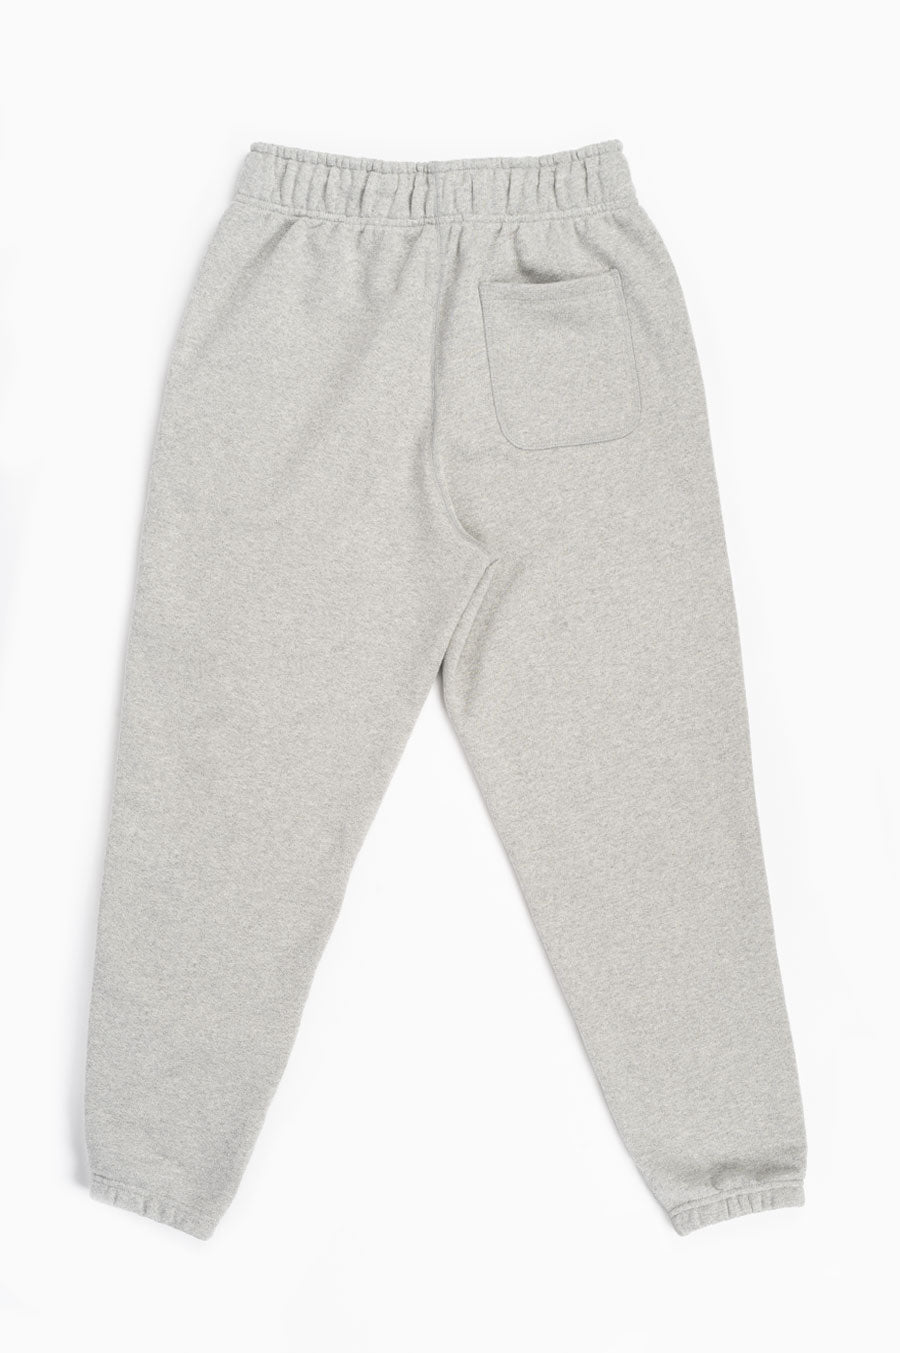 NEW BALANCE MADE IN GREY BLENDS SWEATPANT USA ATHLETIC –